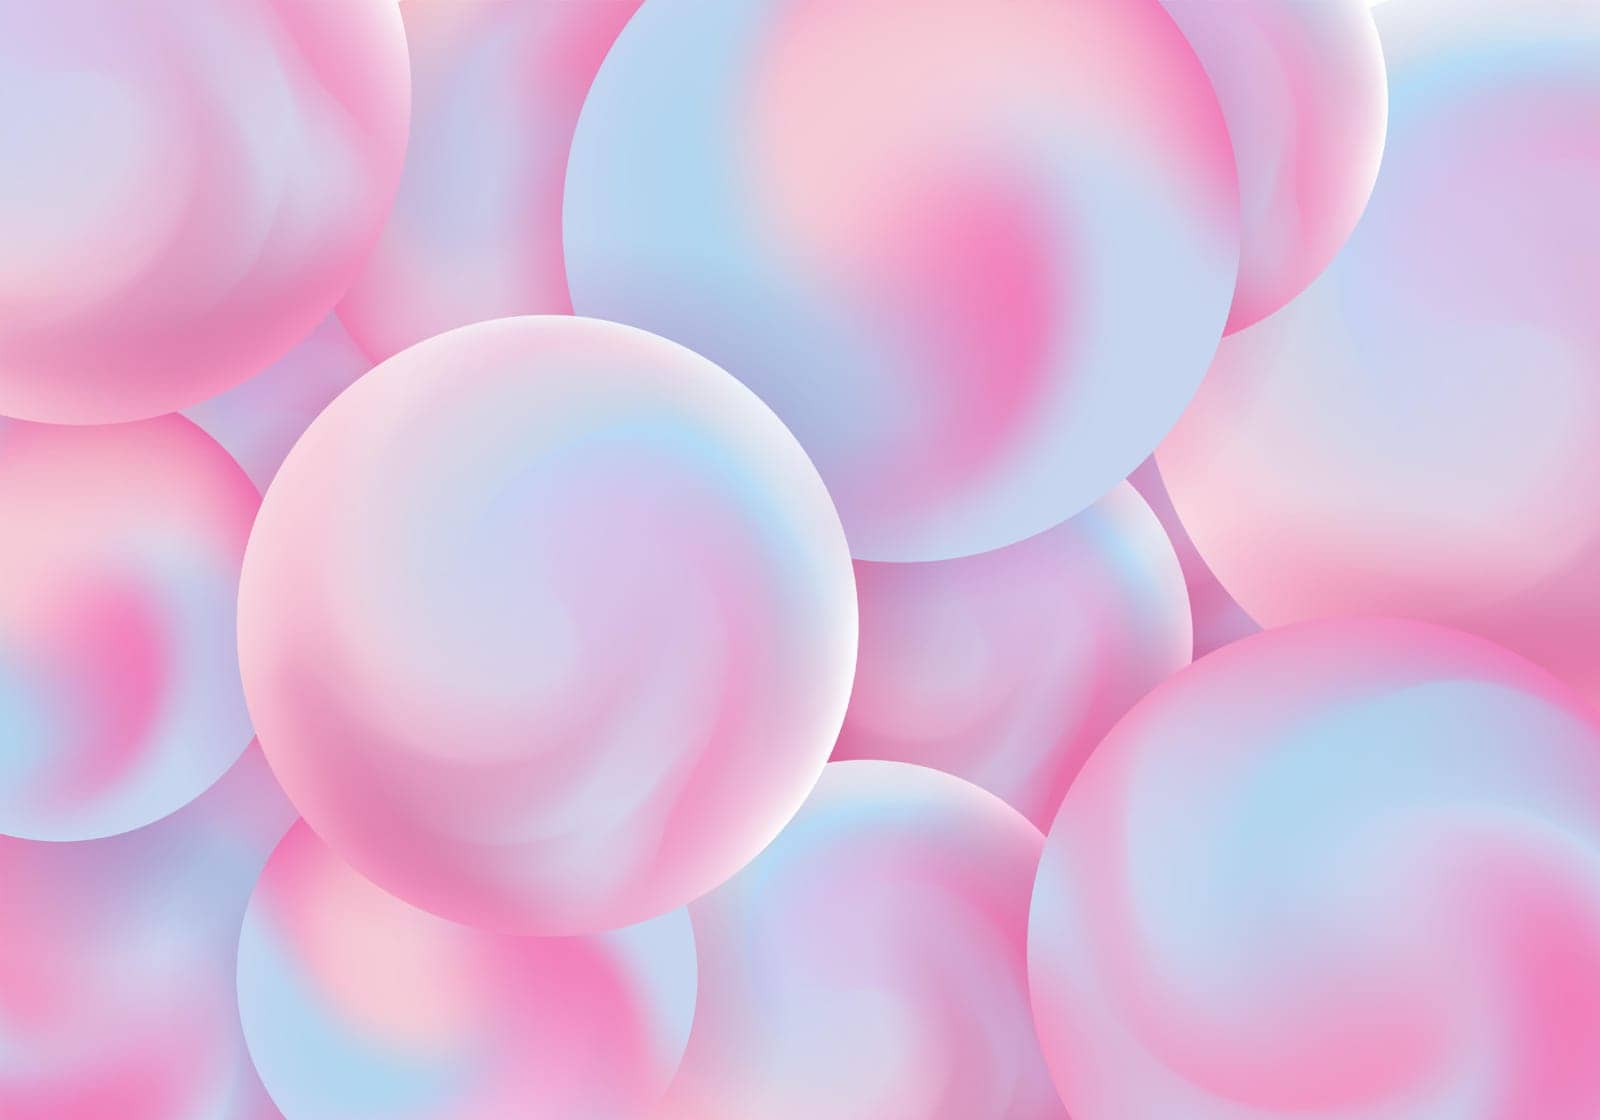 Abstract background with gradient spheres. Pink and purple soft bubbles. Vector illustration of balls textured .Modern cover concept. by Vovmar